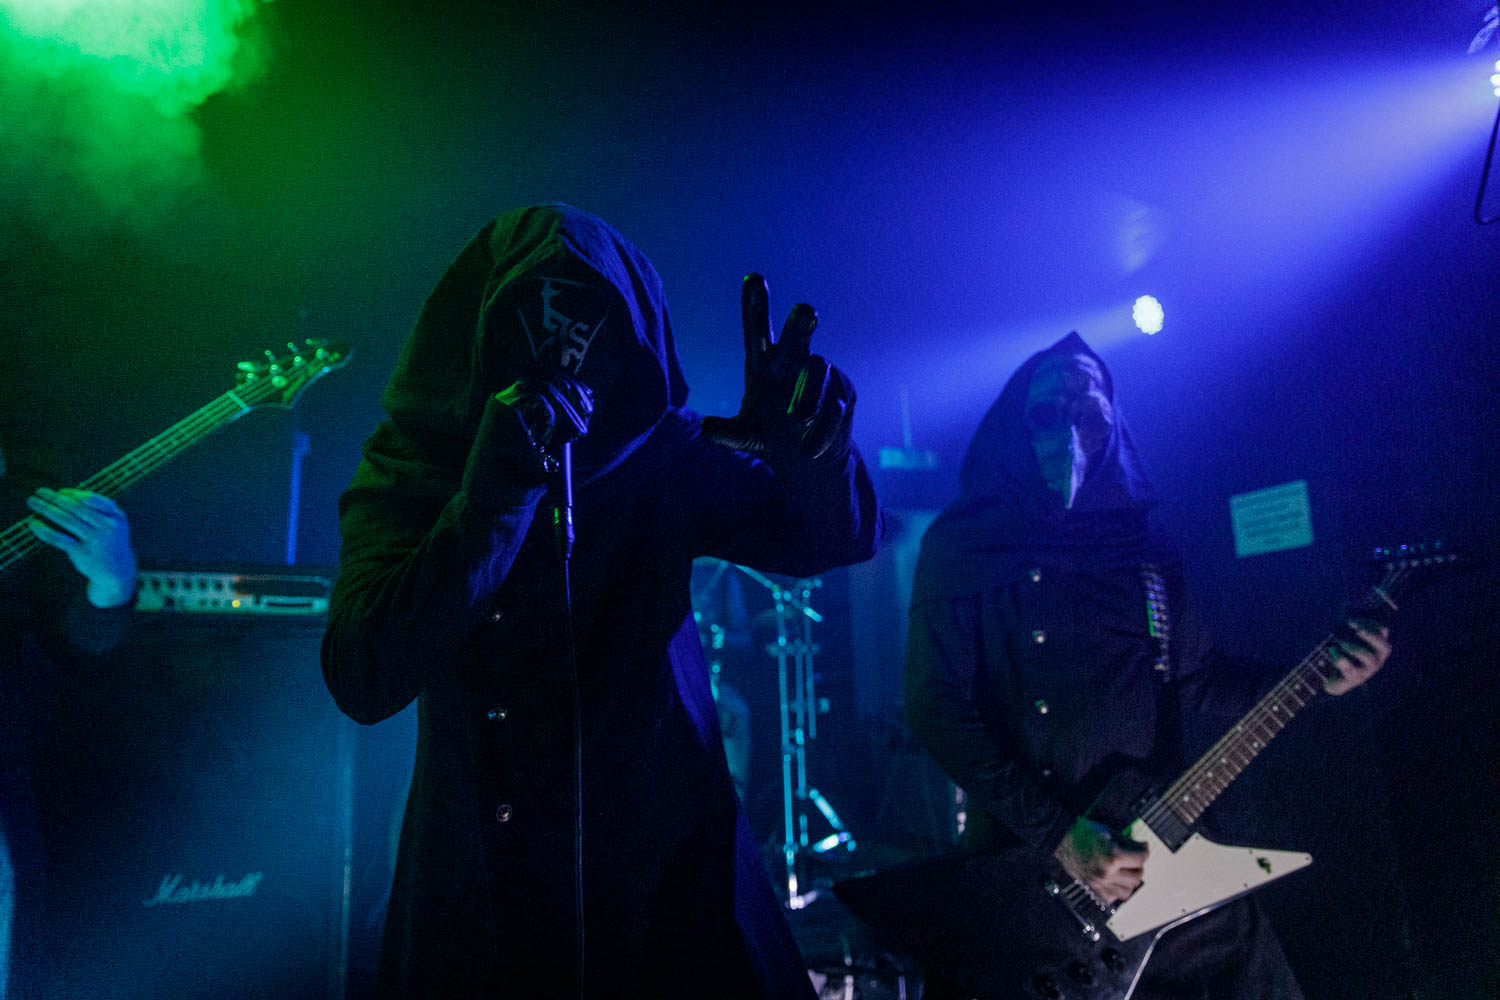 The Infernal Sea at The Outpost in Liverpool on July 11th 2019